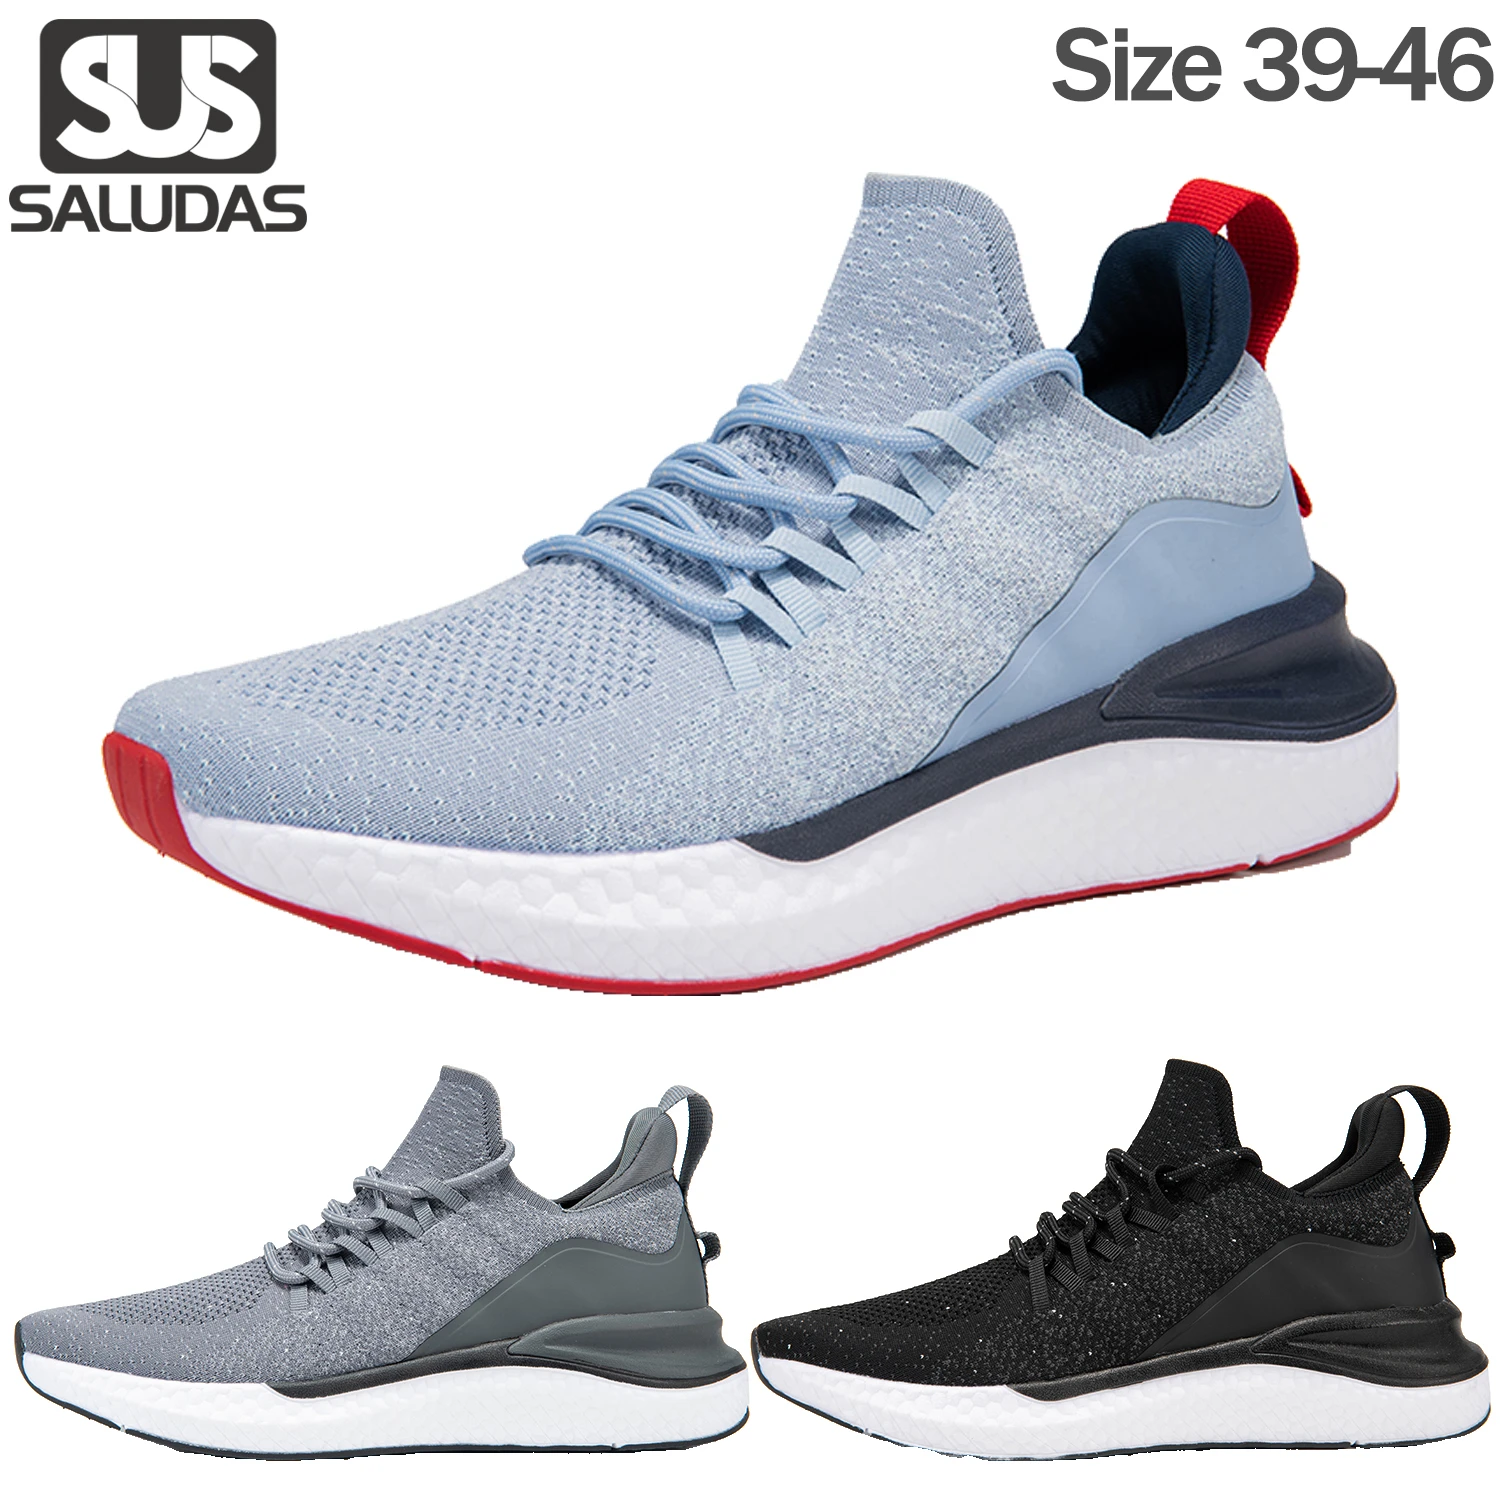 Saludas Men Sport Shoes Sneakers Lightweight Breathable Canvas Shoes  Outdoor Running Shoes Casual Zapatillas Tennis Shoes - Running Shoes -  AliExpress